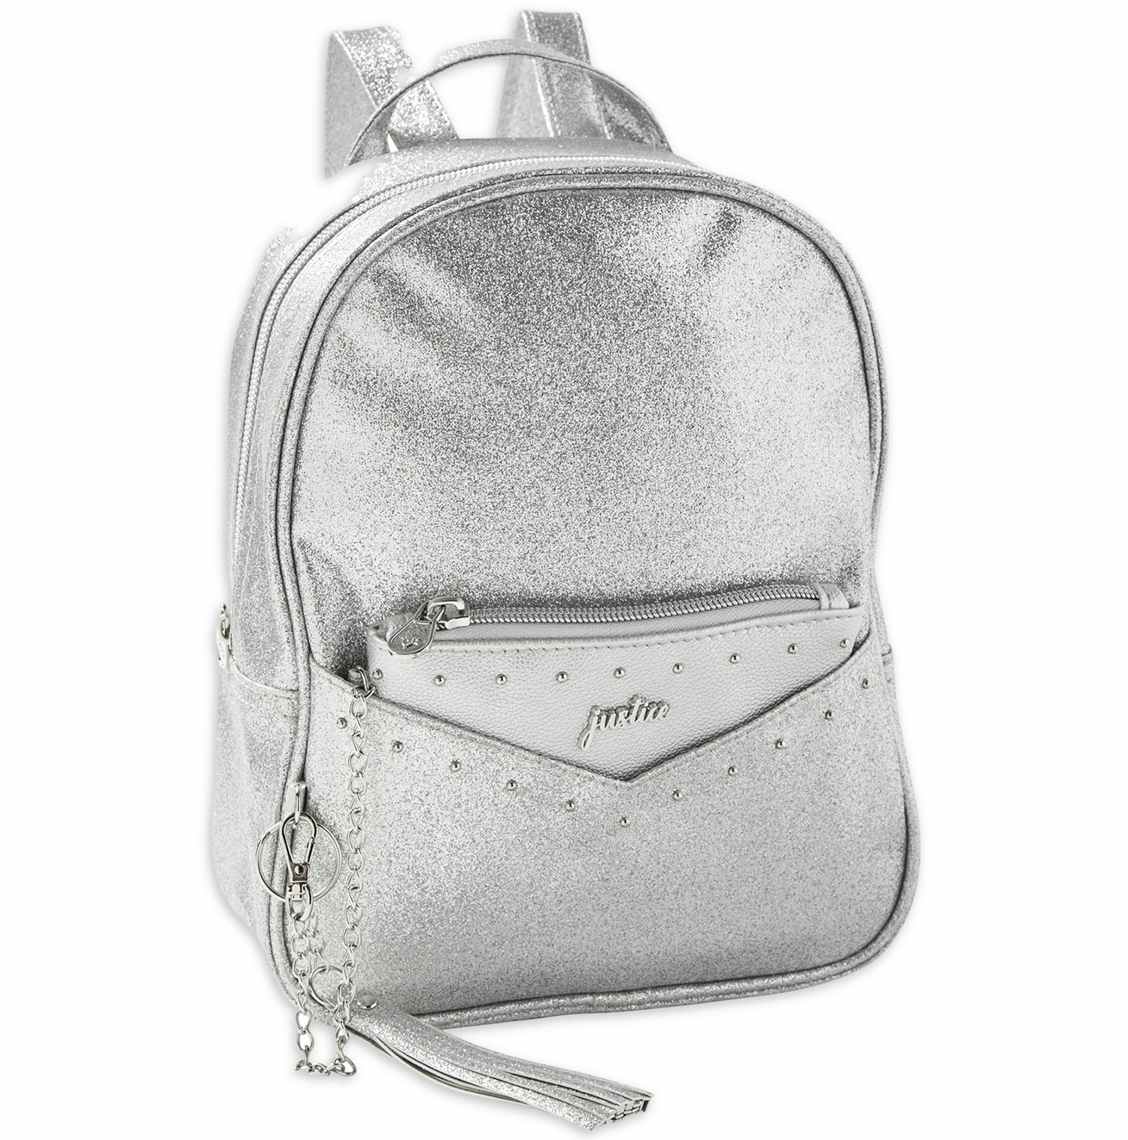 stock photo of justice mini backpack on white background